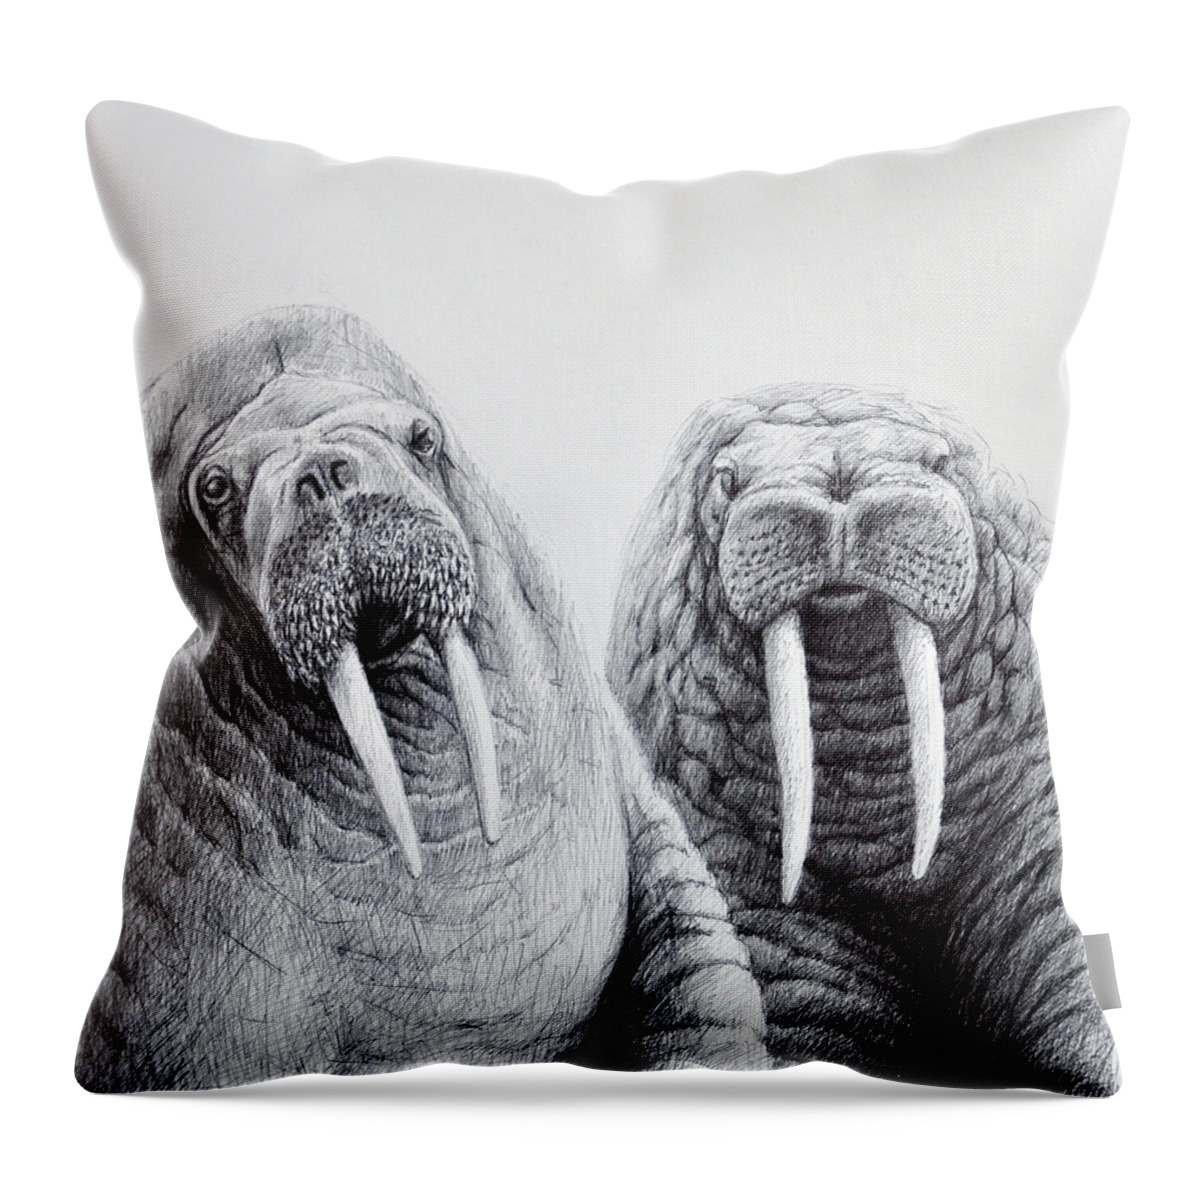 Animal Throw Pillow featuring the drawing Walrus Buddies by Rick Hansen